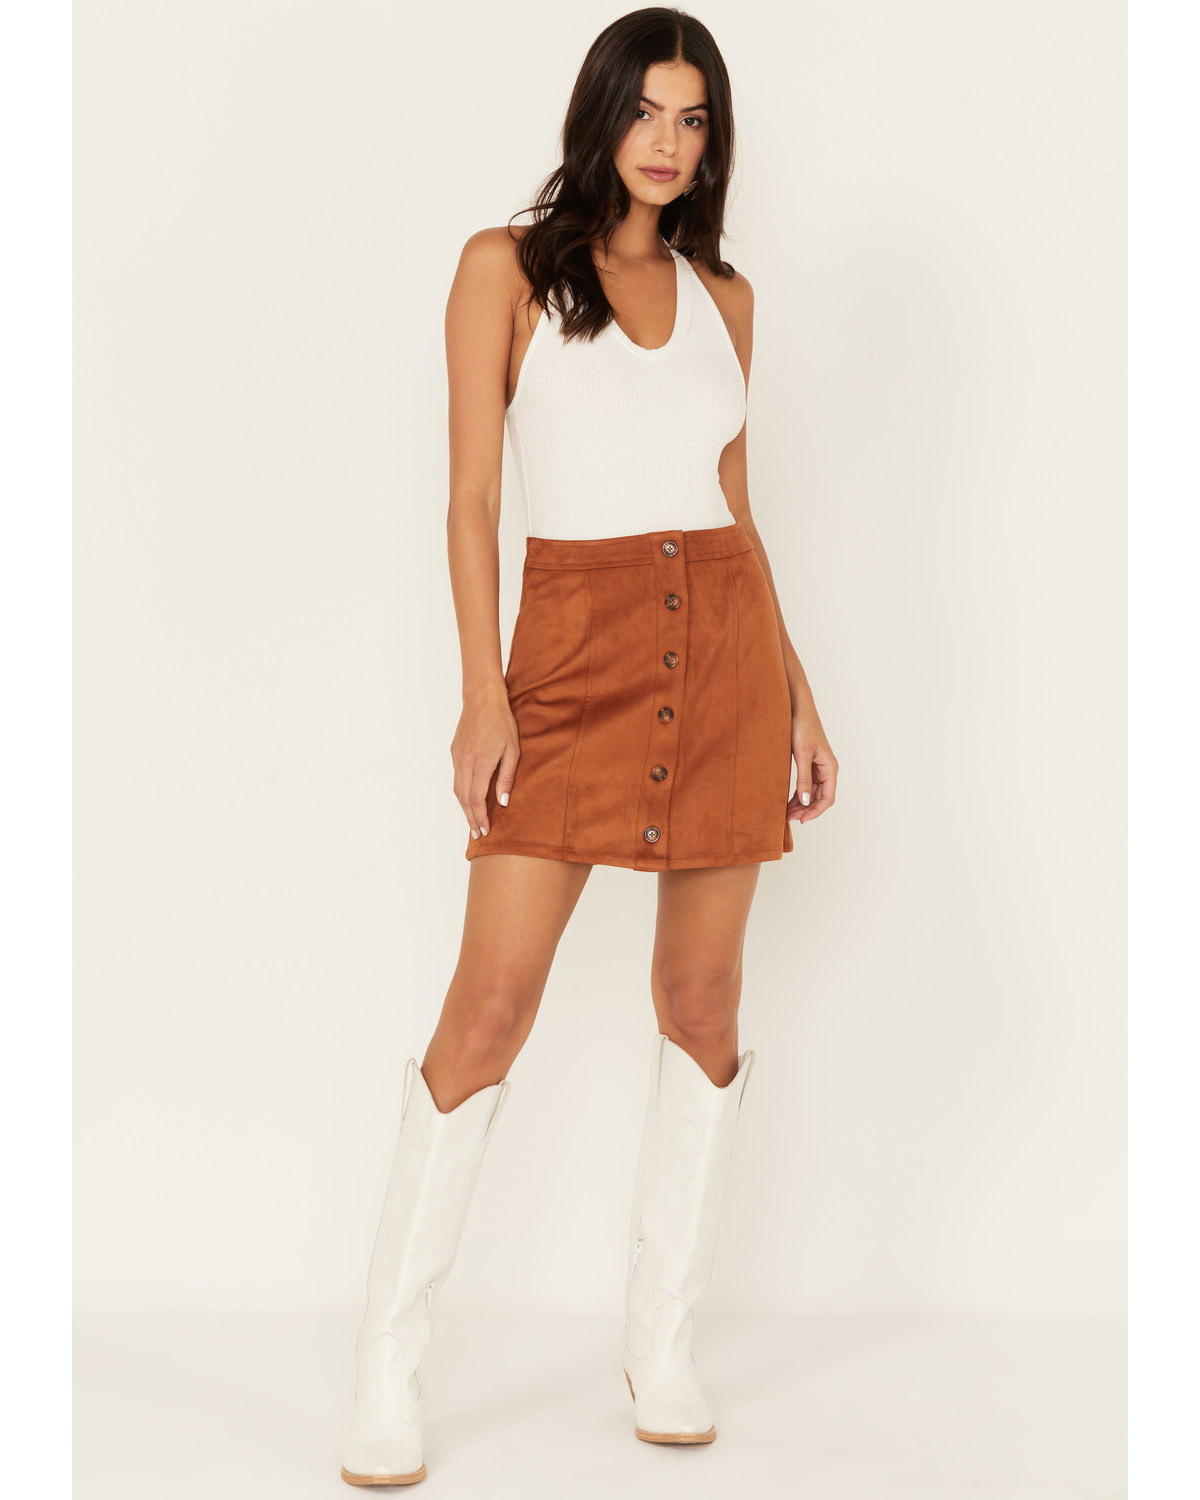 Cleo + Wolf Women's Faux Suede Skirt